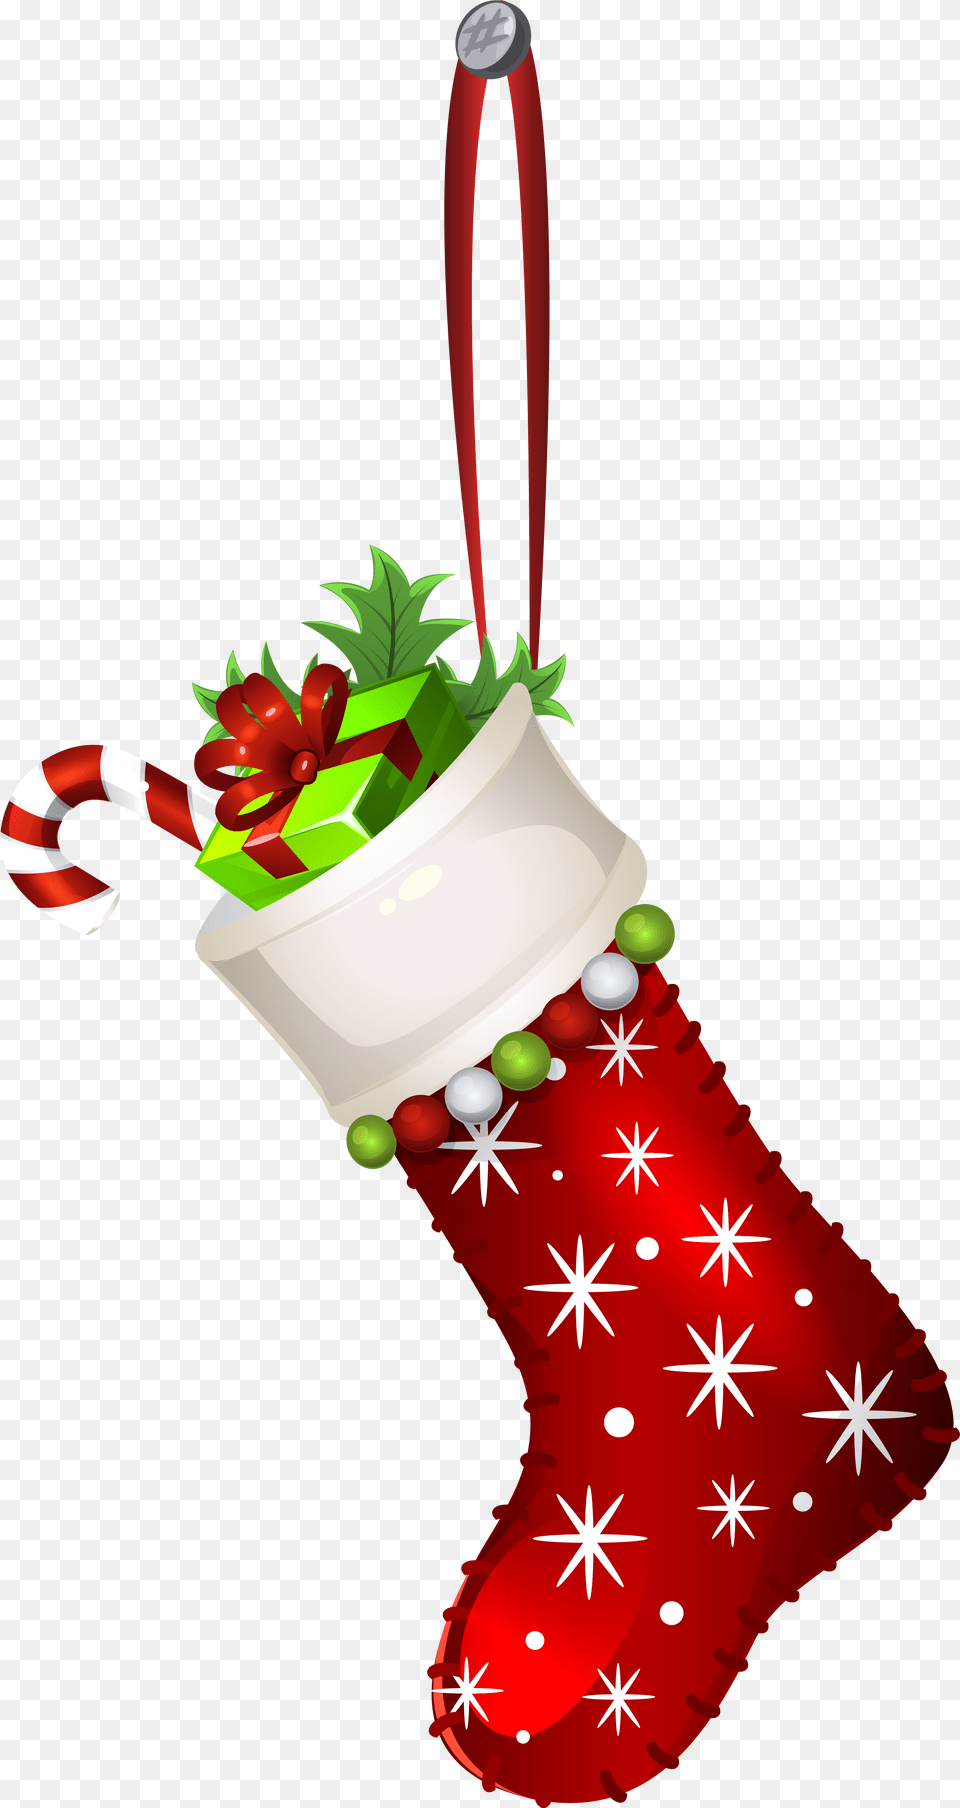 Ornament Christmas Decoration Stocking Transparent Christmas Stocking Transparent Background, Hosiery, Clothing, Festival, Christmas Decorations Png Image